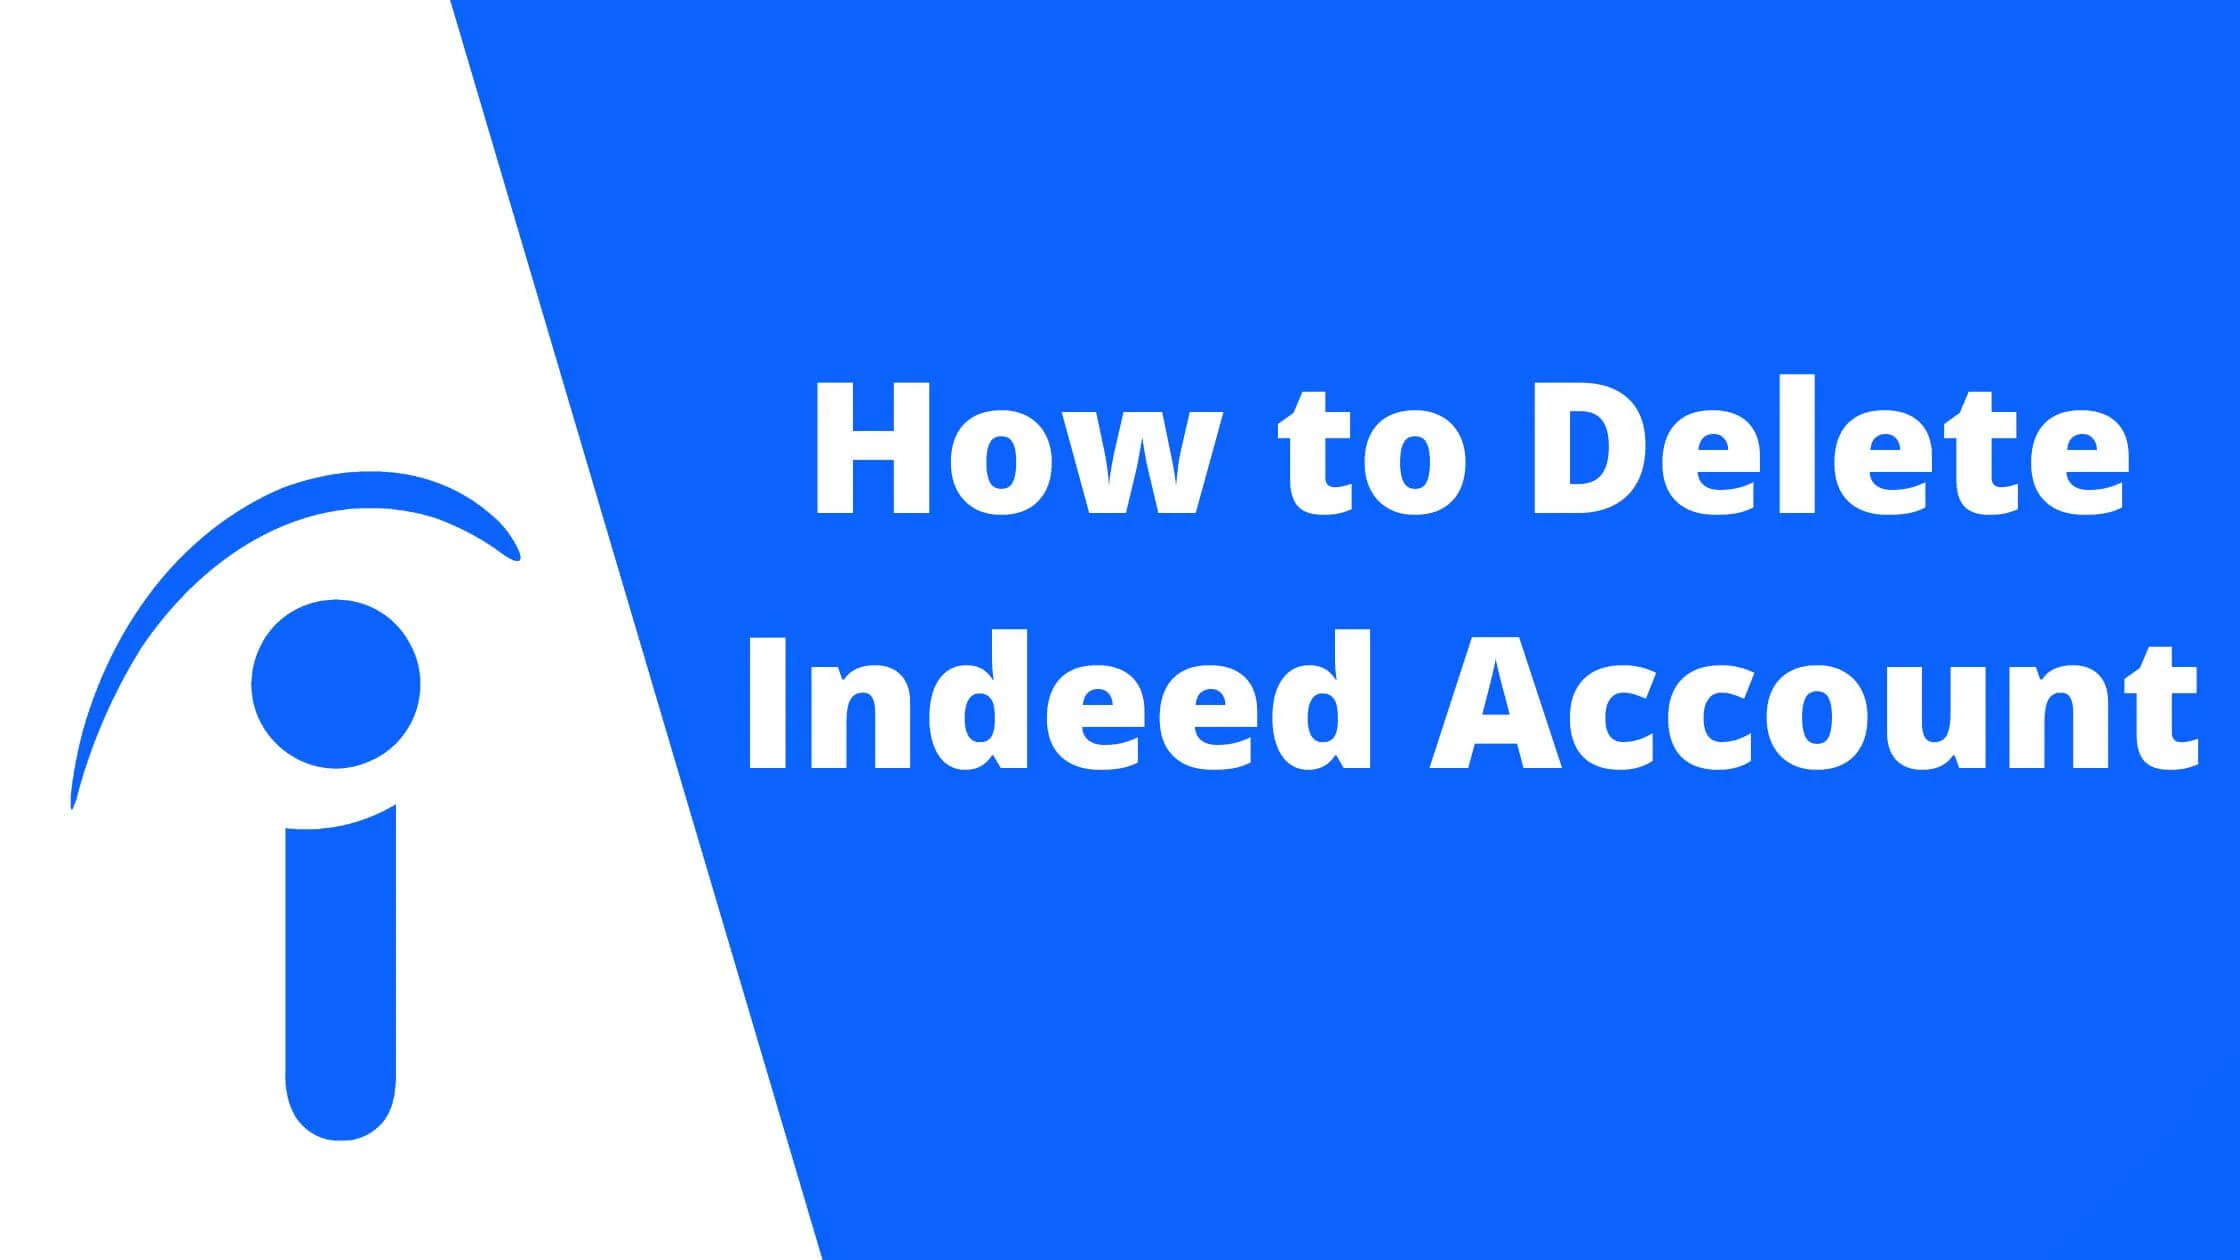 How to Delete an Indeed Account